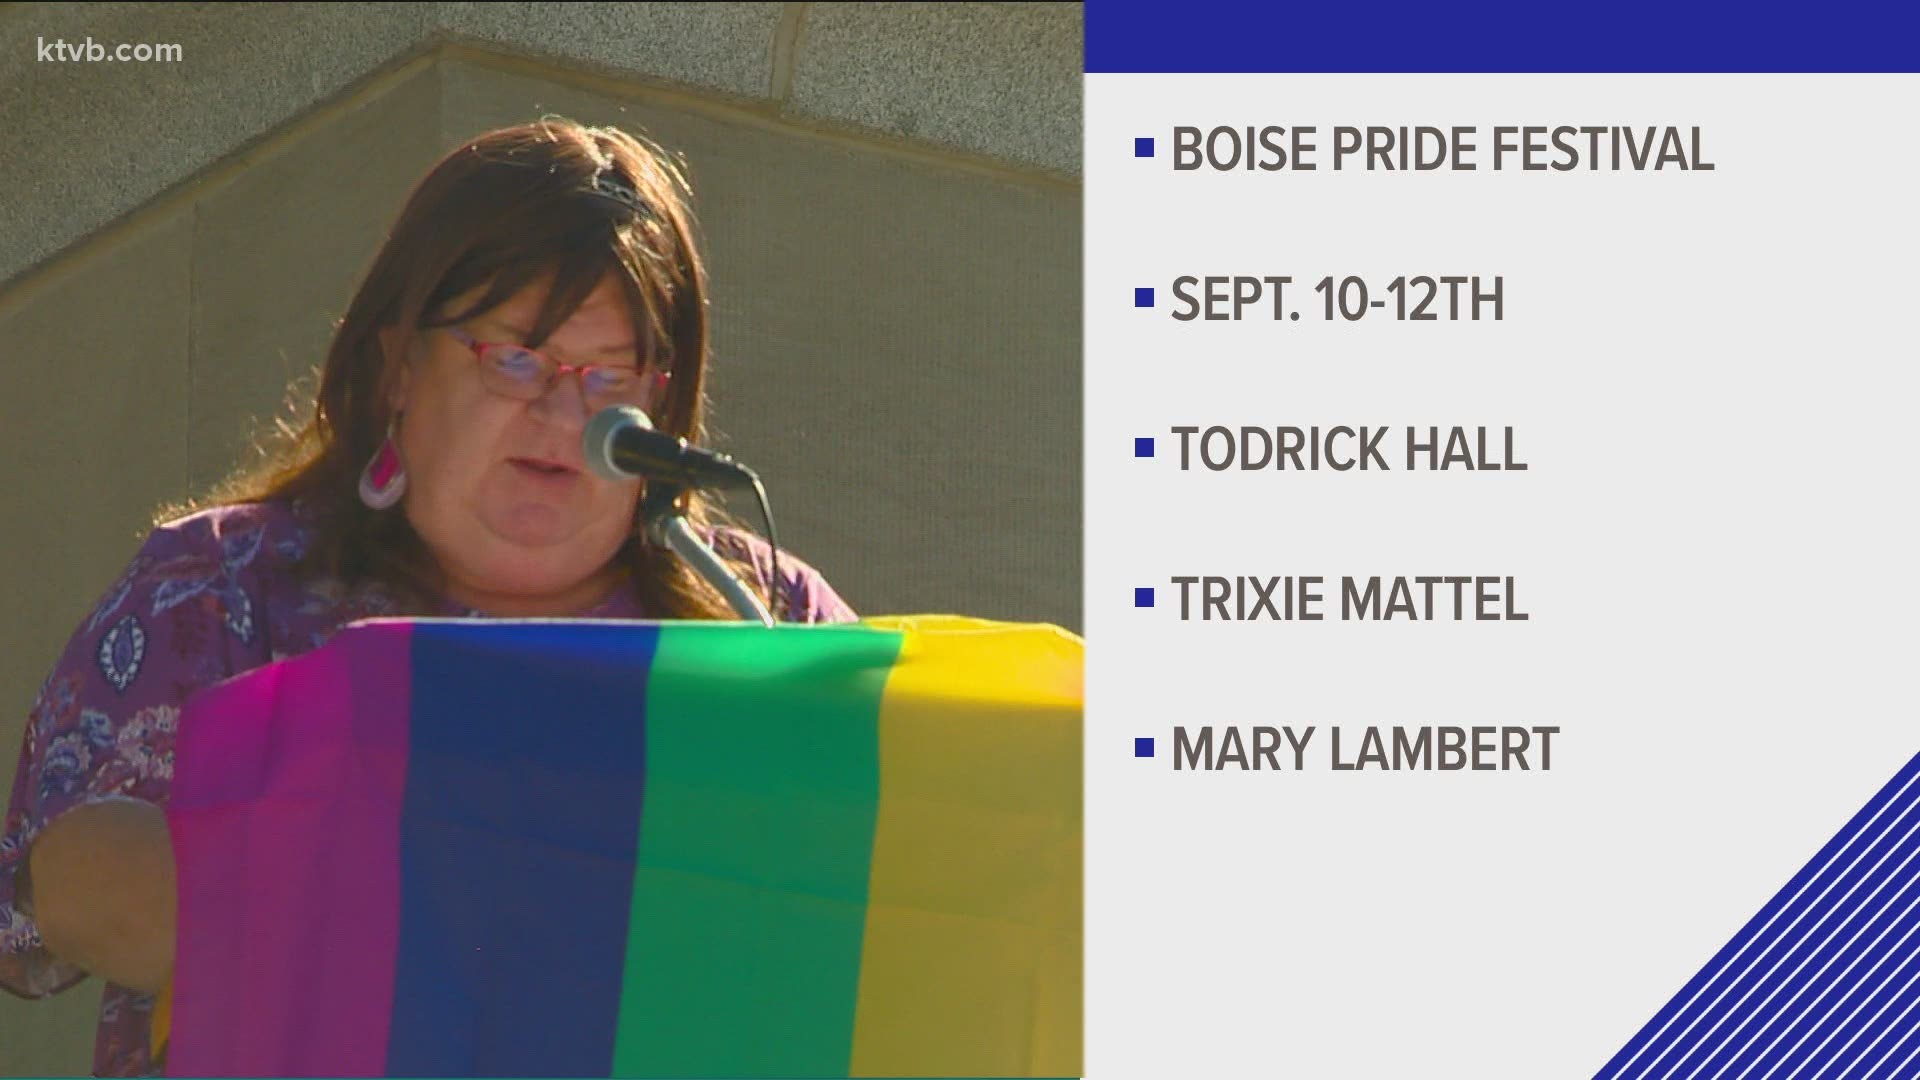 The Pride Festival is set to take place between Sept. 10-12, 2021.